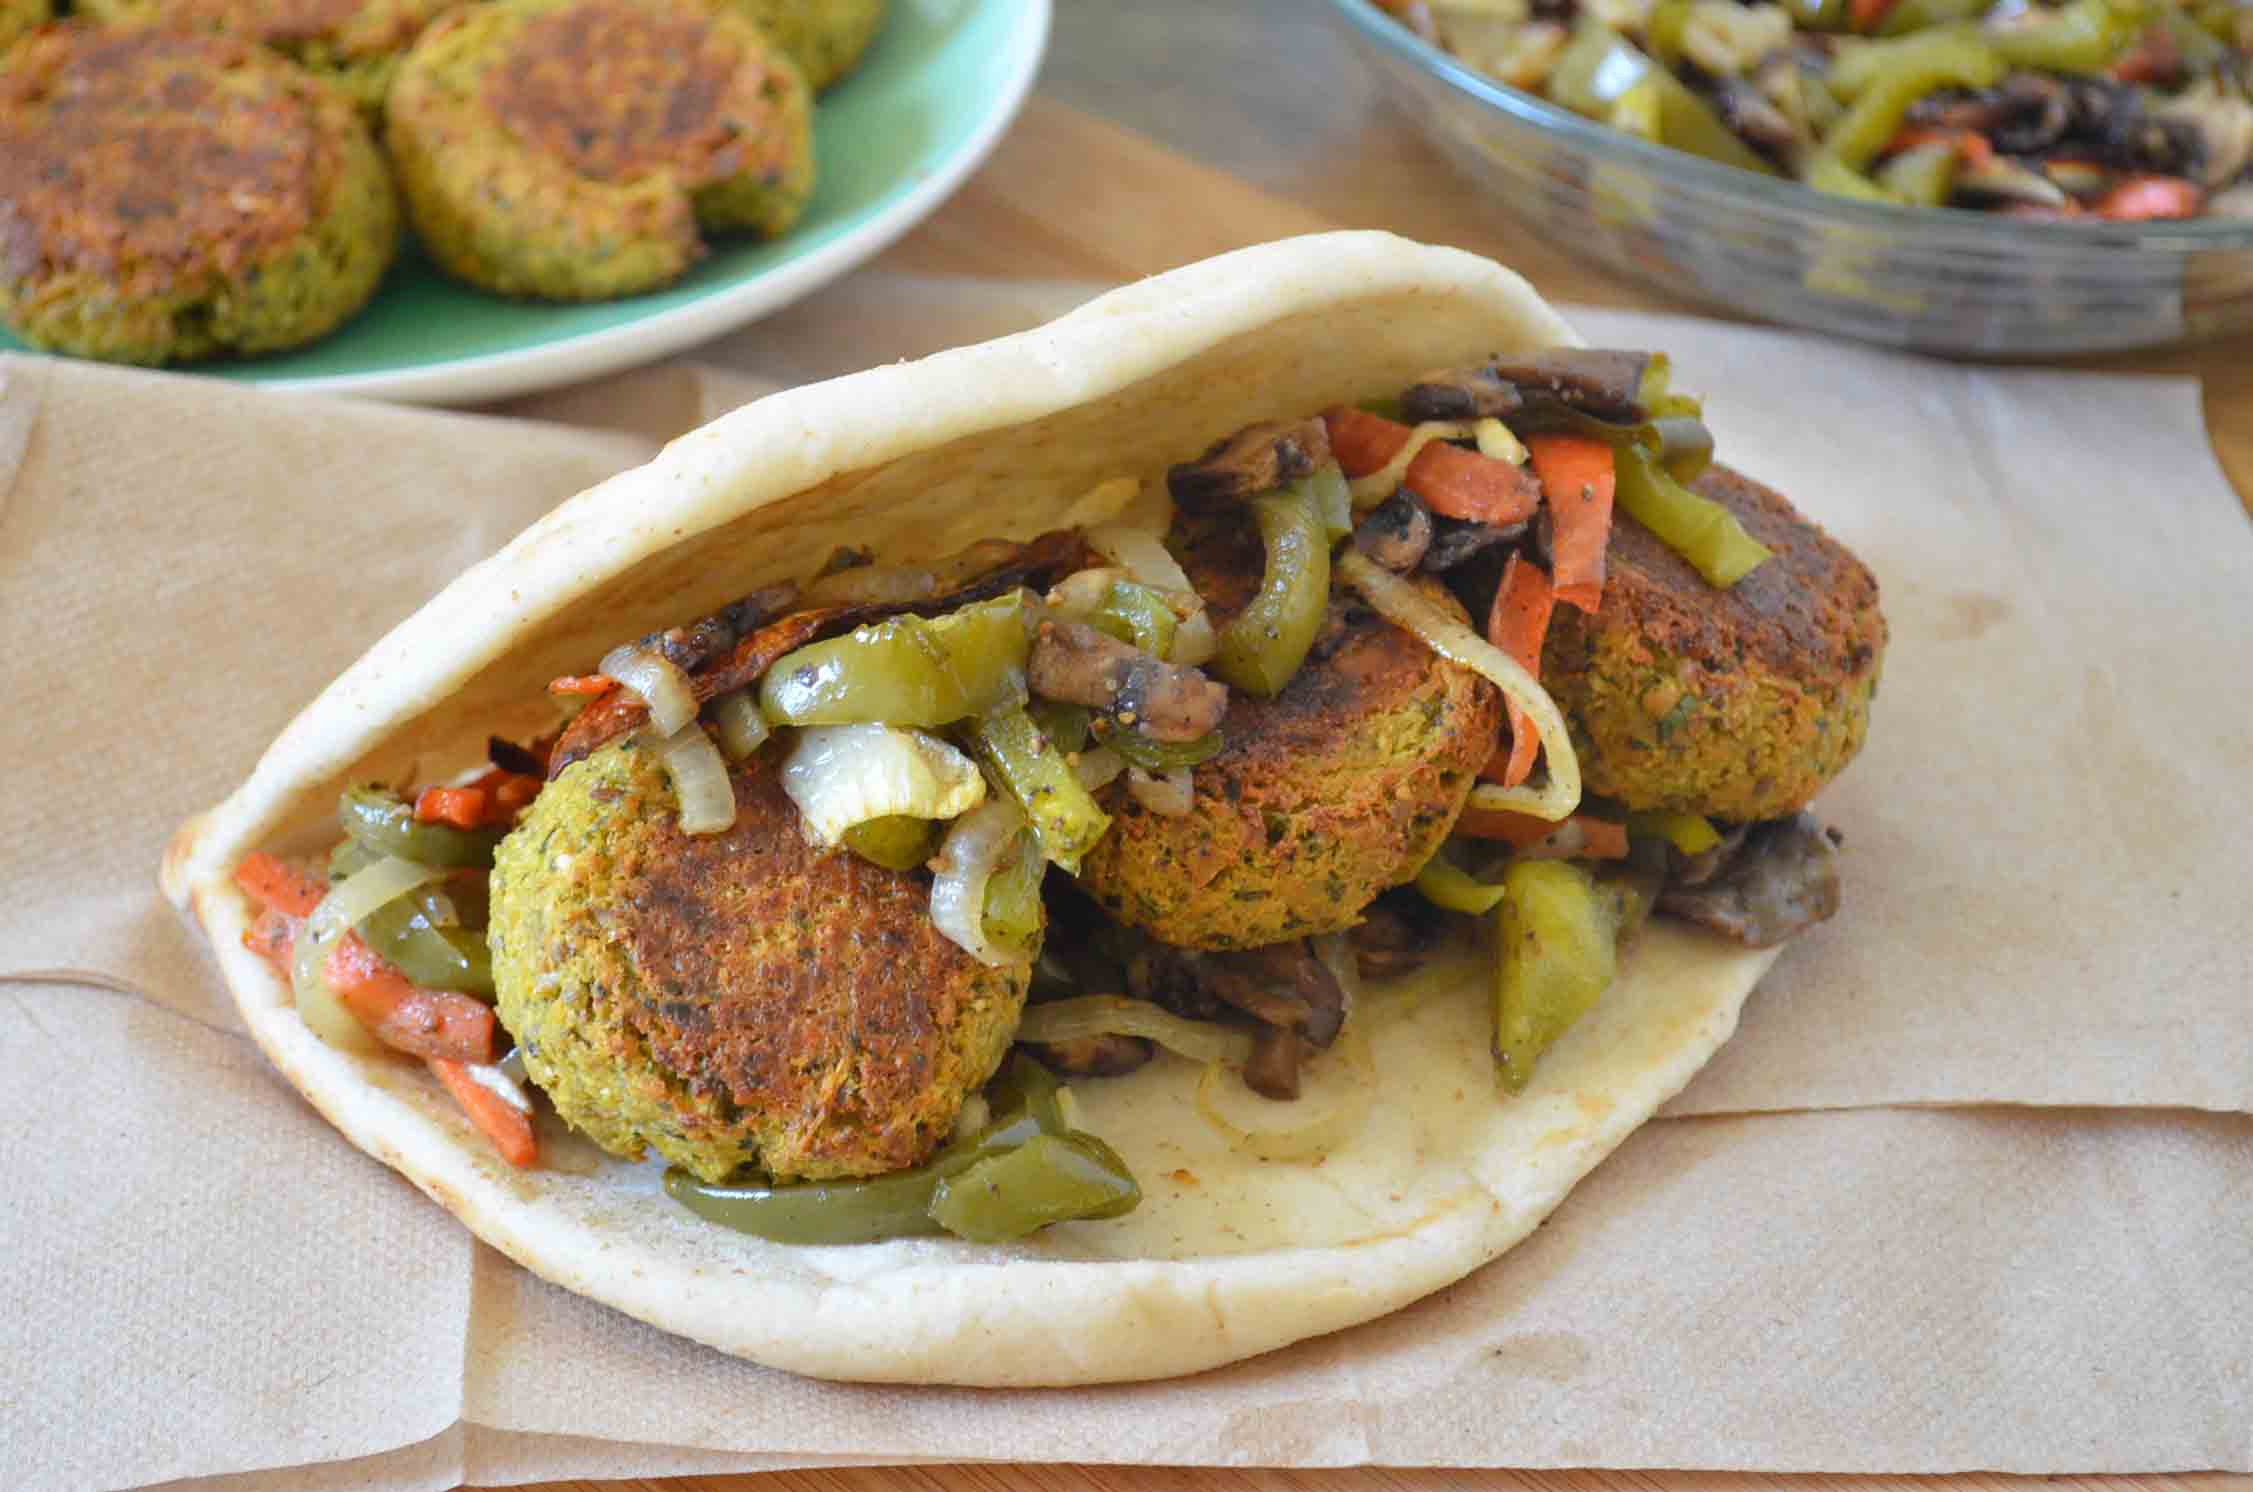 Pita Sandwich With Falafel And Vegetables Recipe by Archana&amp;#39;s Kitchen